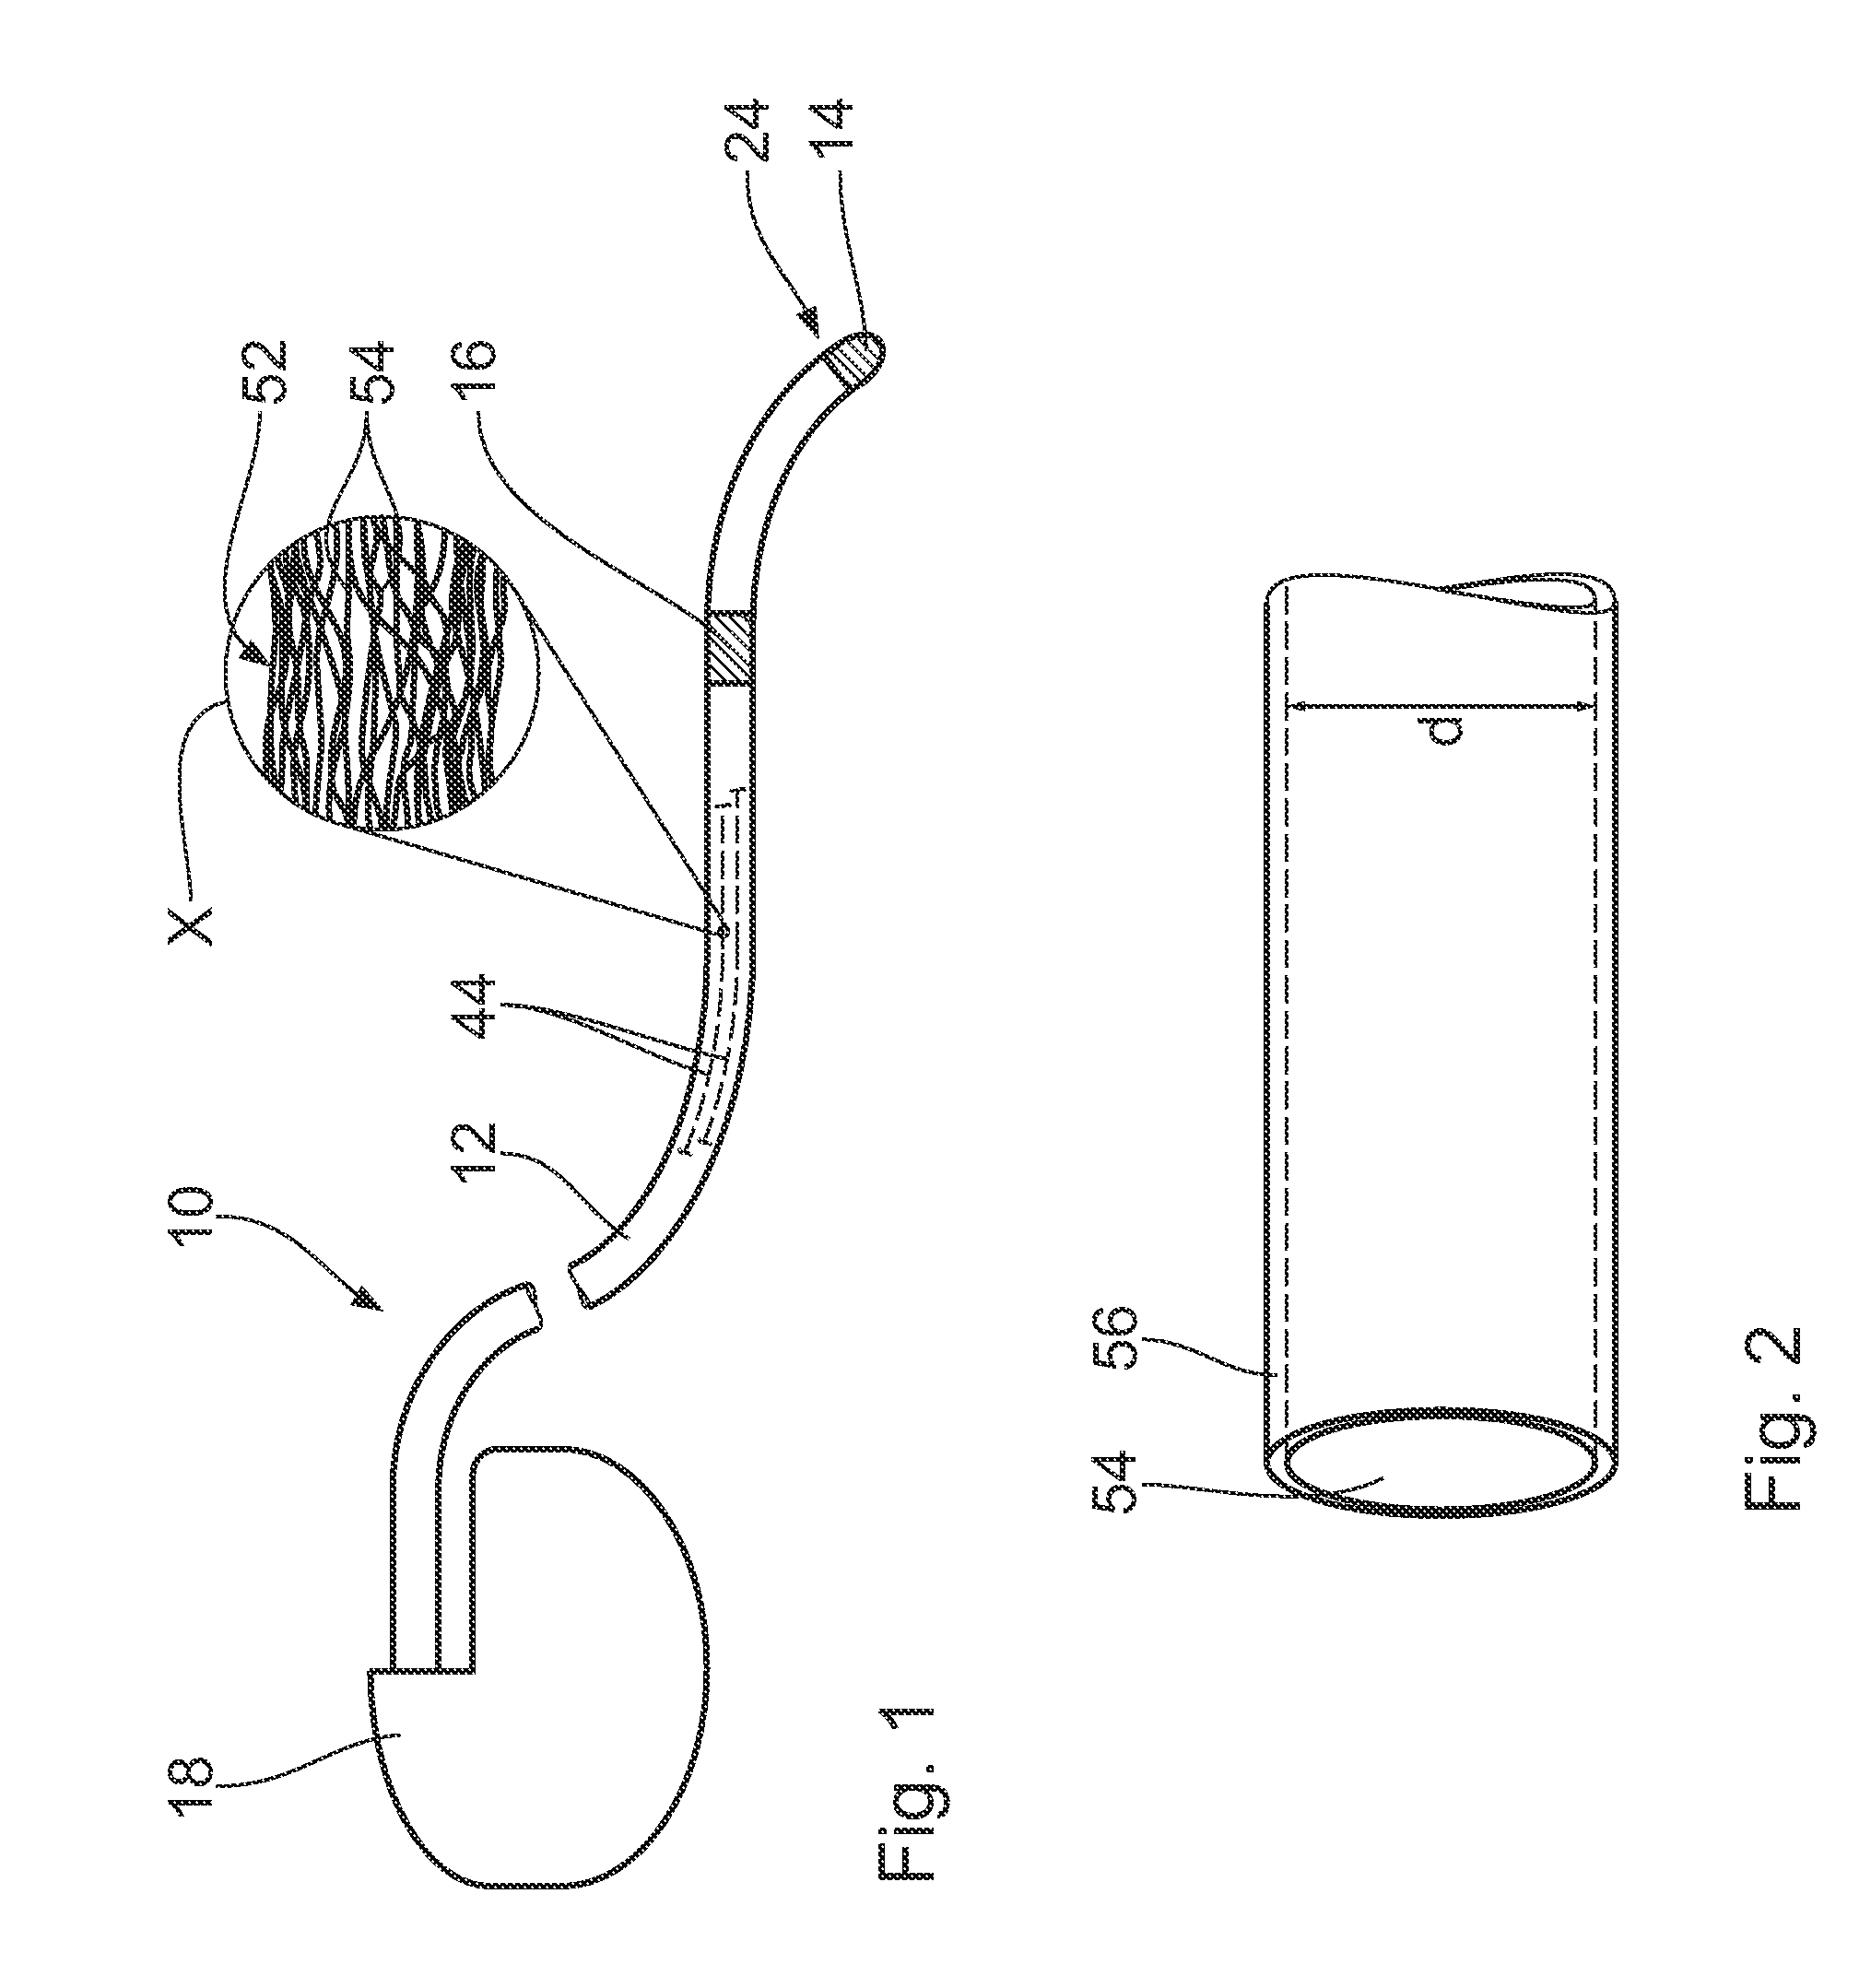 Electrode device for electrodiagnosis and/or electrotherapy